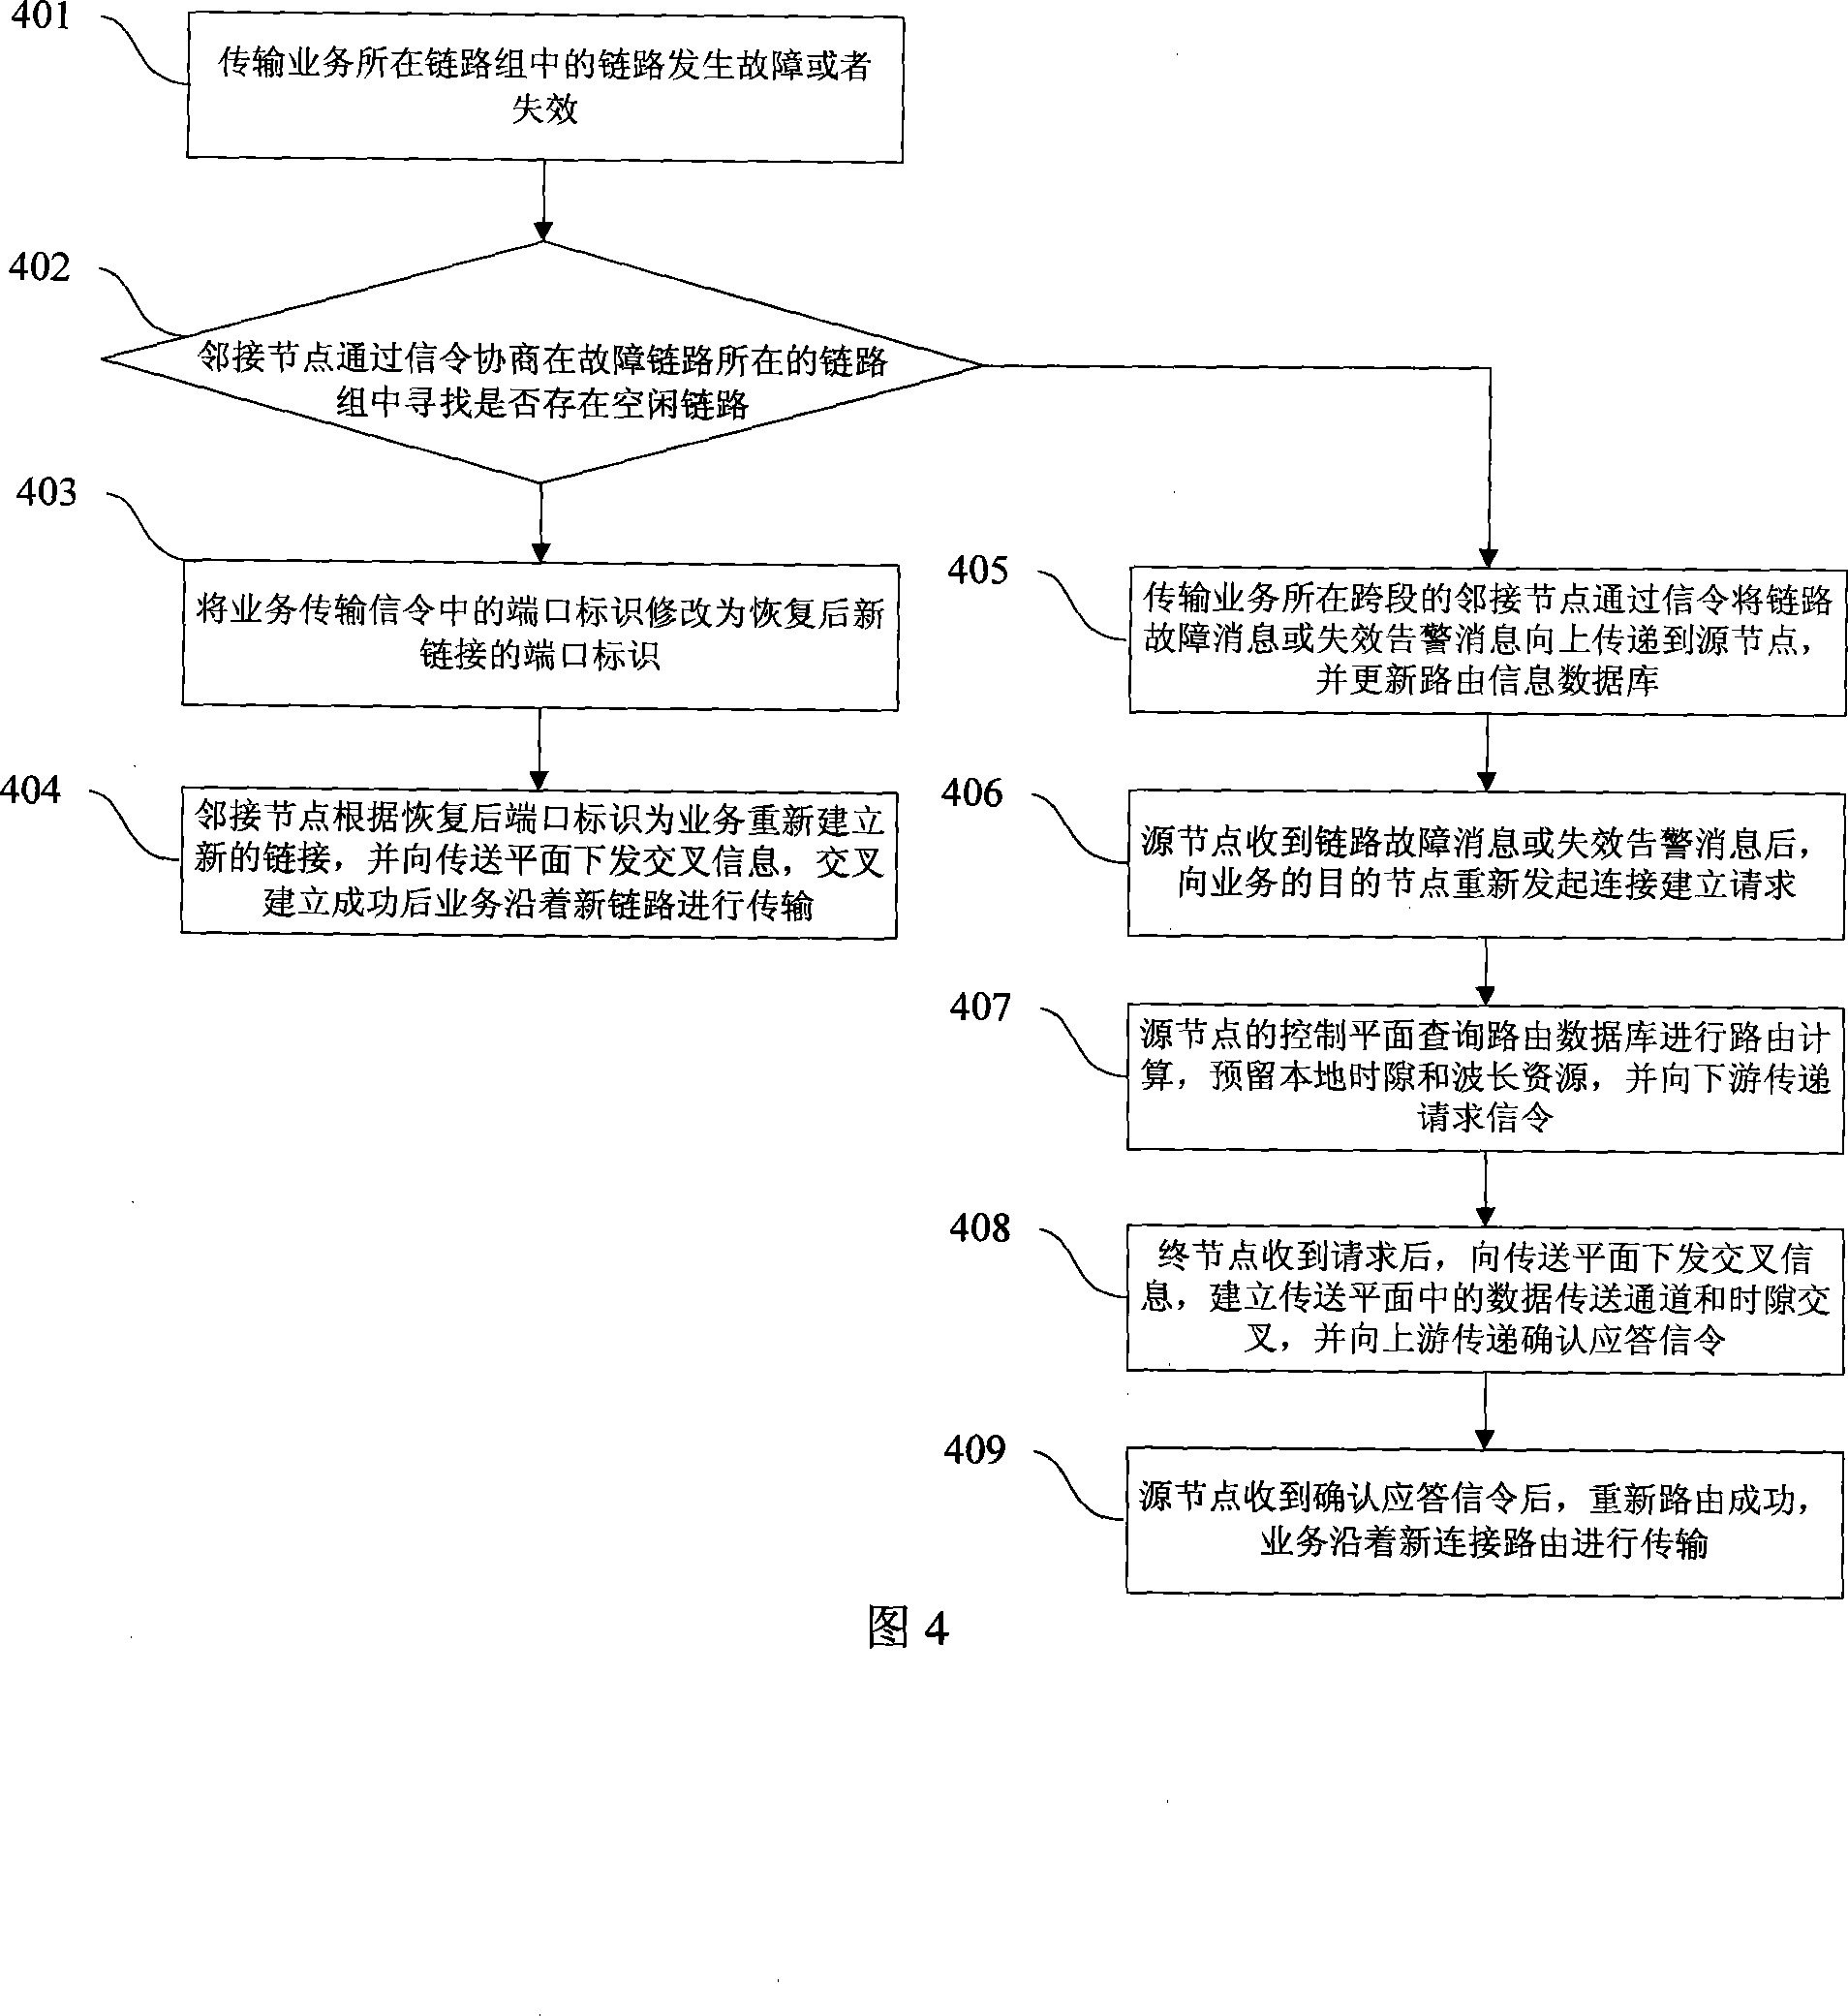 Method for recovering local span mesh network in automatic exchanging optical network